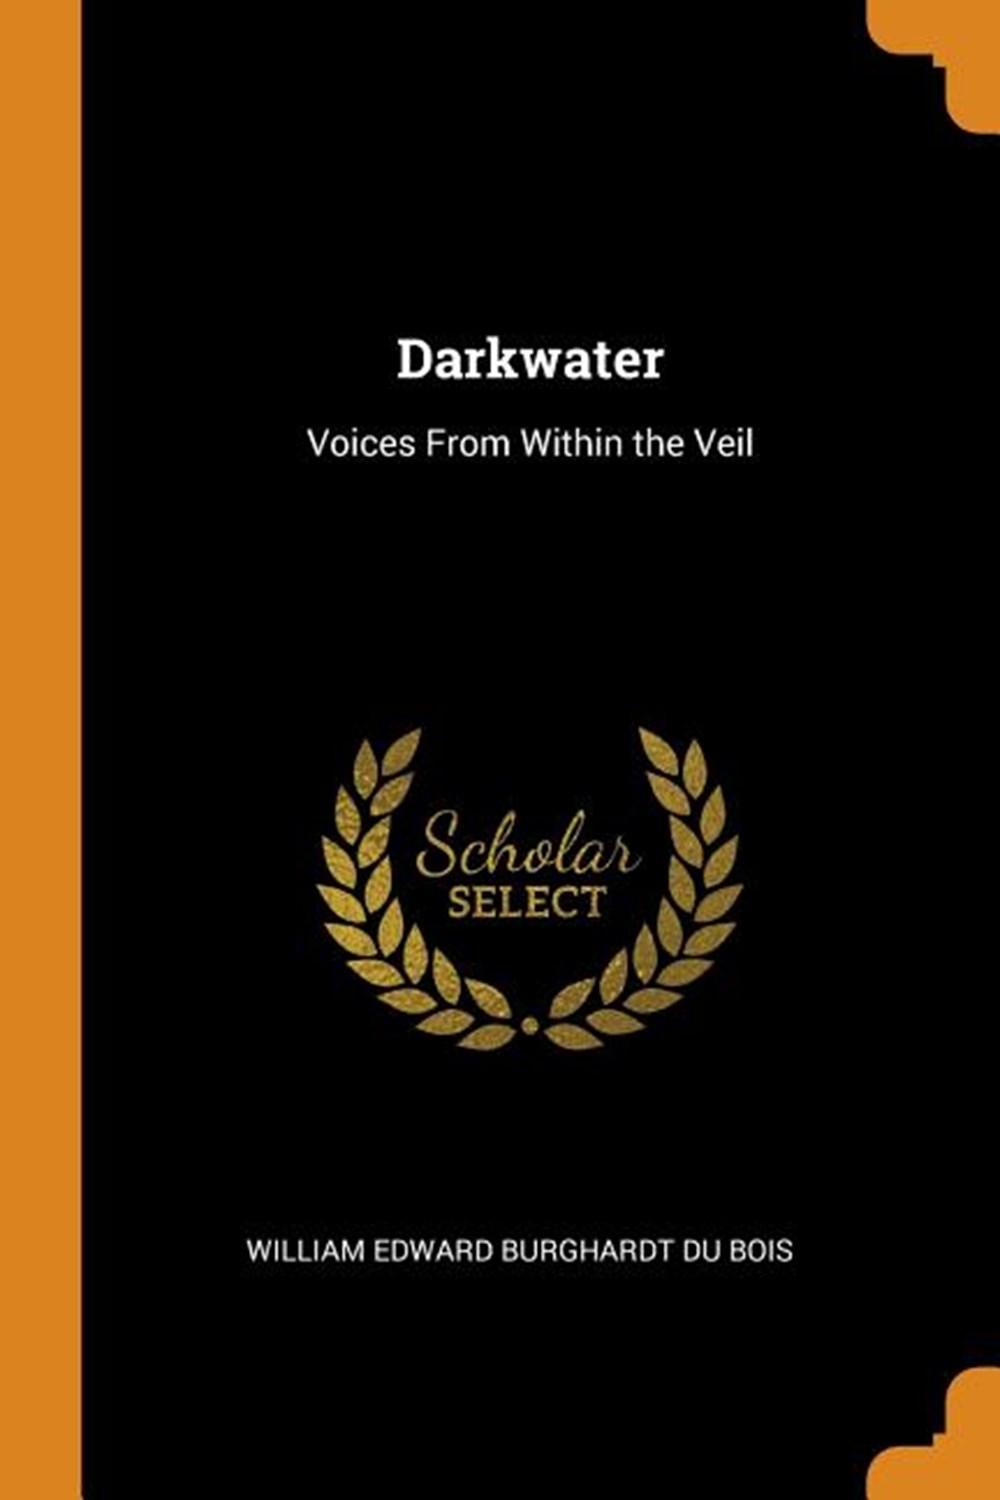 Darkwater: Voices from Within the Veil